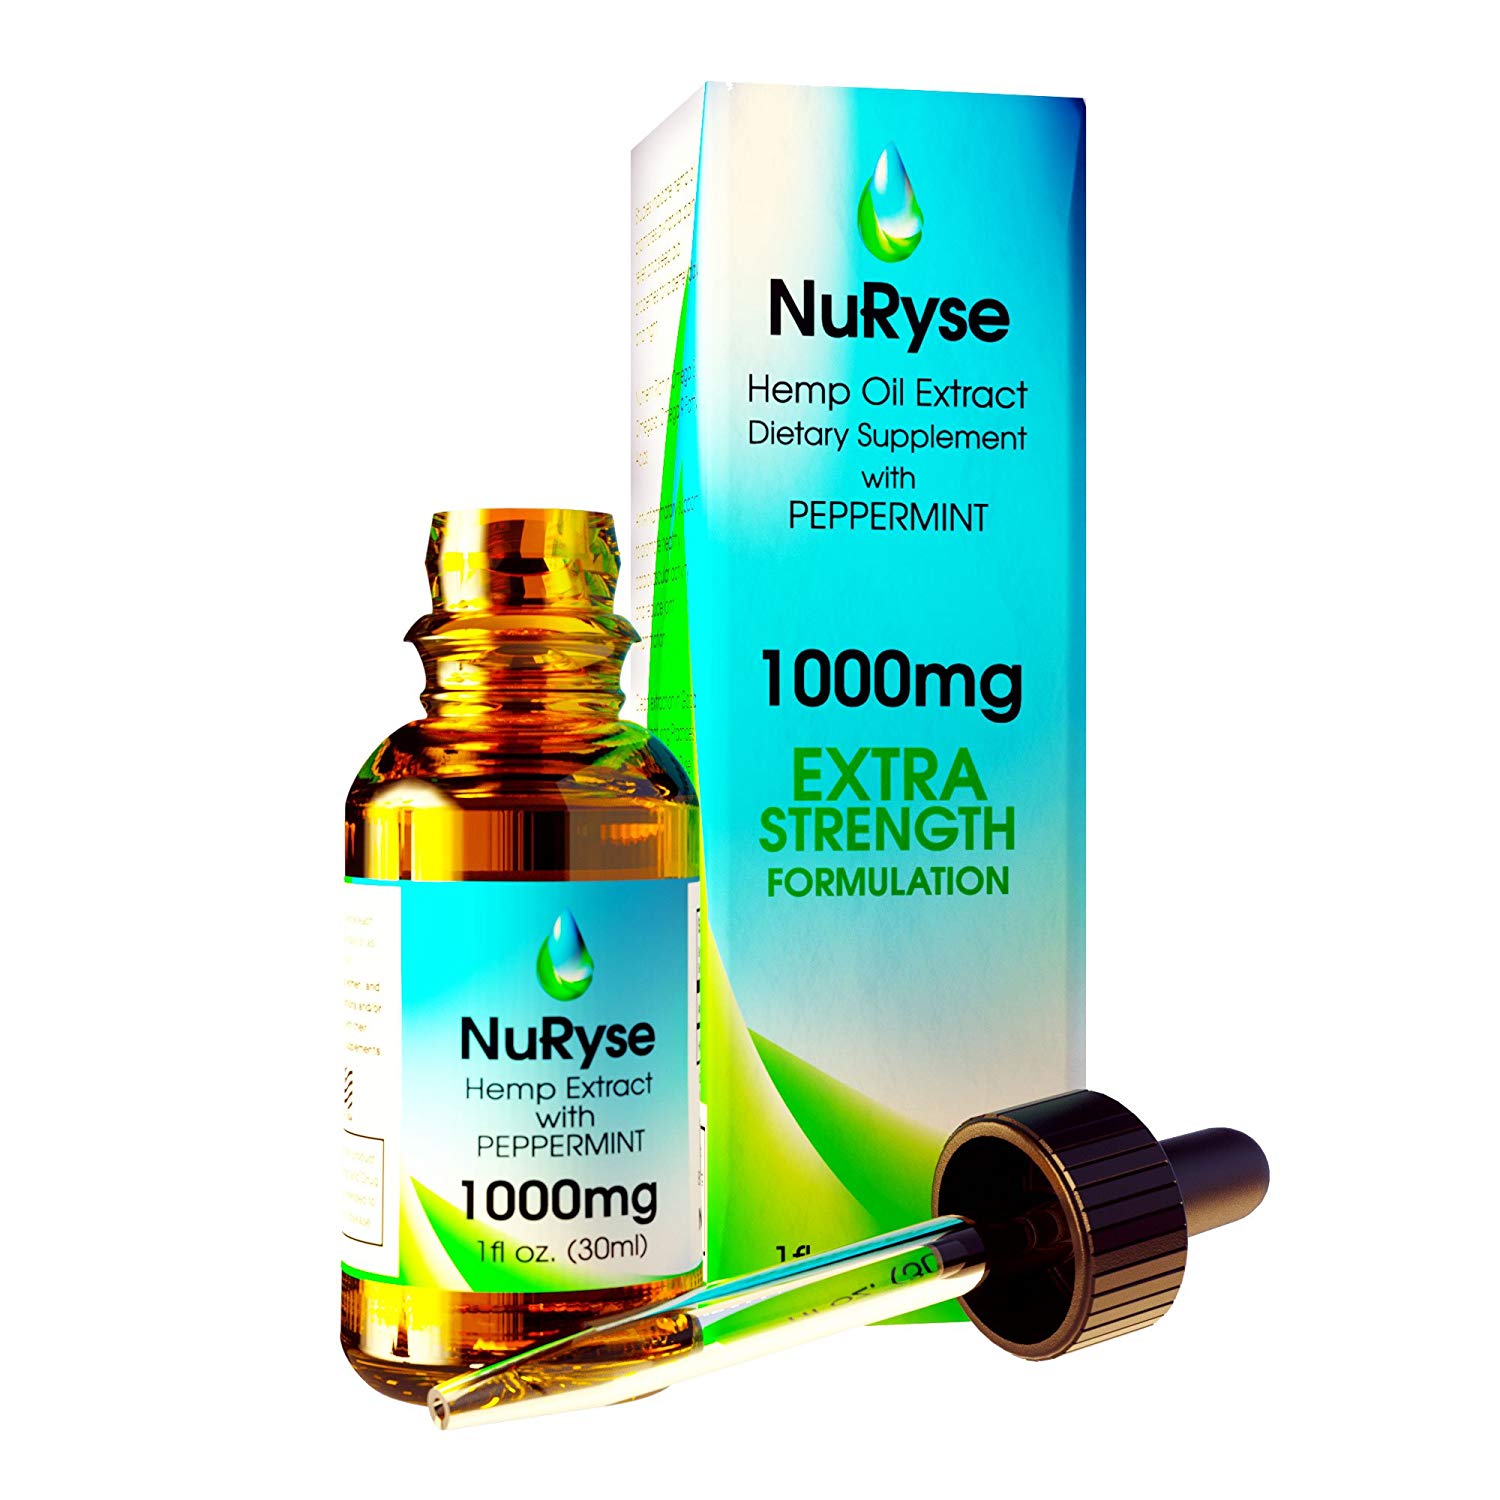 All-Natural Hemp Oil Extract Drops: 1000 mg Herbal Supplement for Daily Use By NuRyse